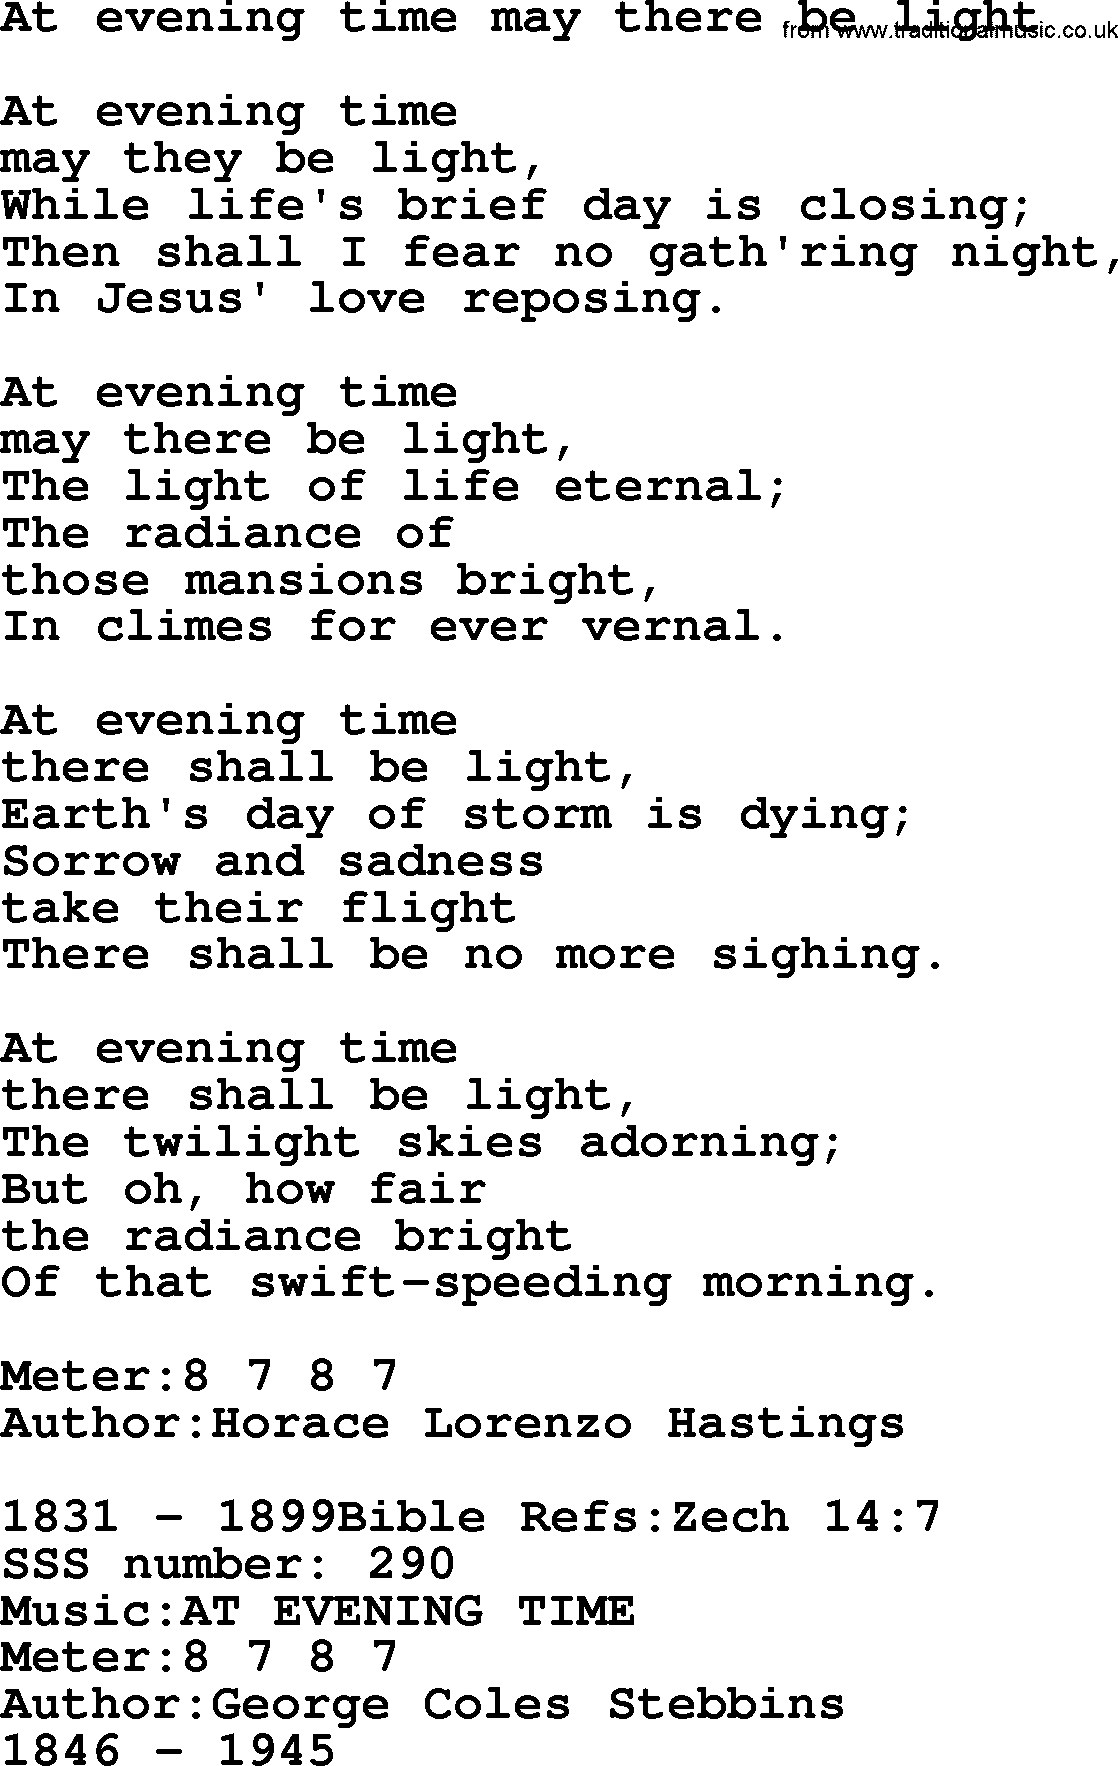 Sacred Songs and Solos complete, 1200 Hymns, title: At Evening Time May There Be Light, lyrics and PDF